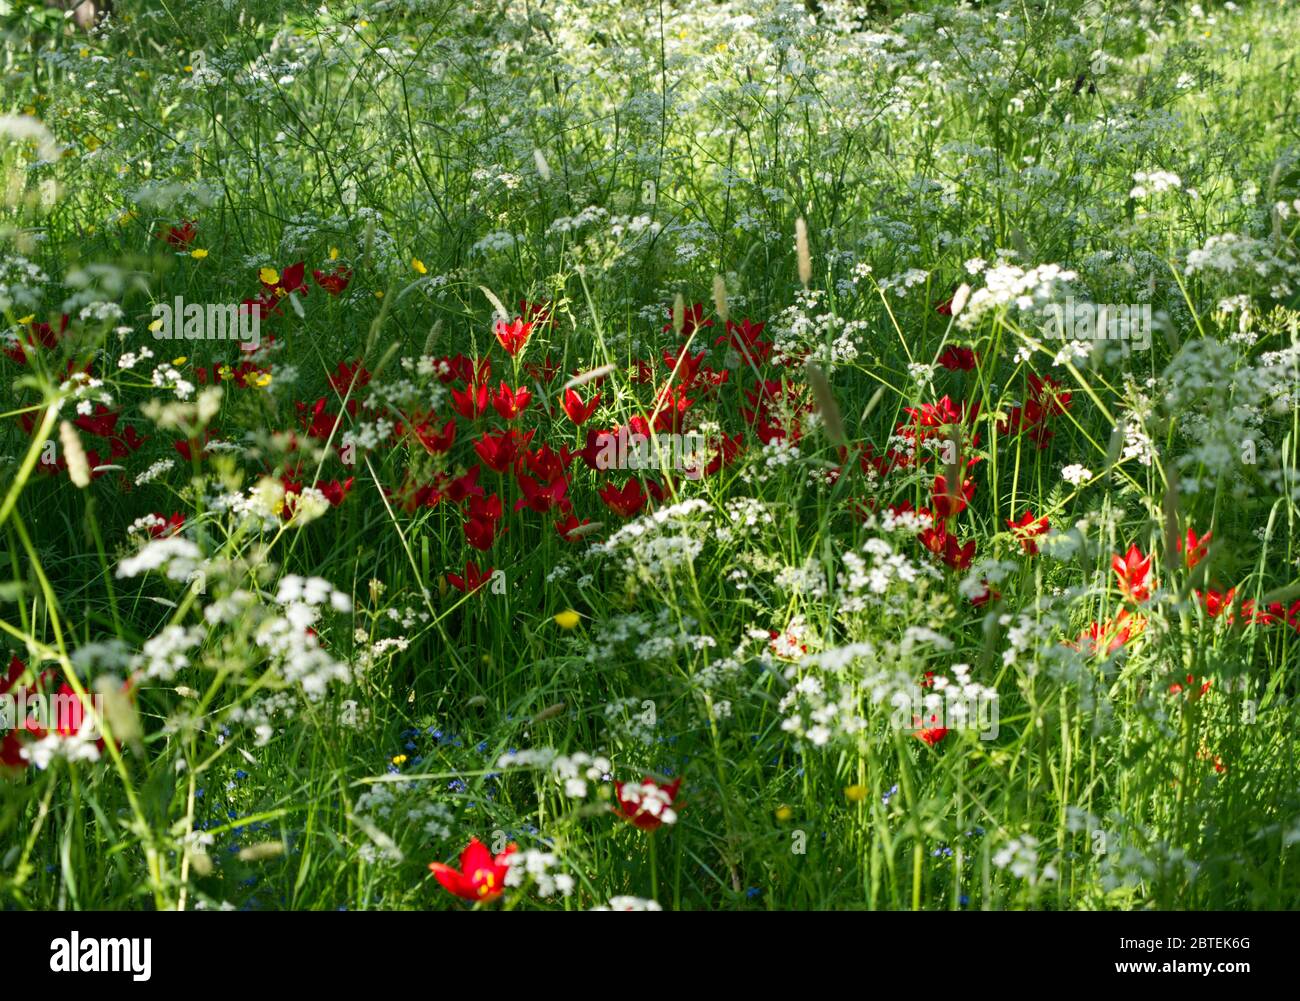 Breathtaking Cow Parsley & Tulip Meadow at Reveley Lodge Gardens, Herfordshire. Late Spring glory on sun kissed day as Coronavirus Lockdown eases. Stock Photo